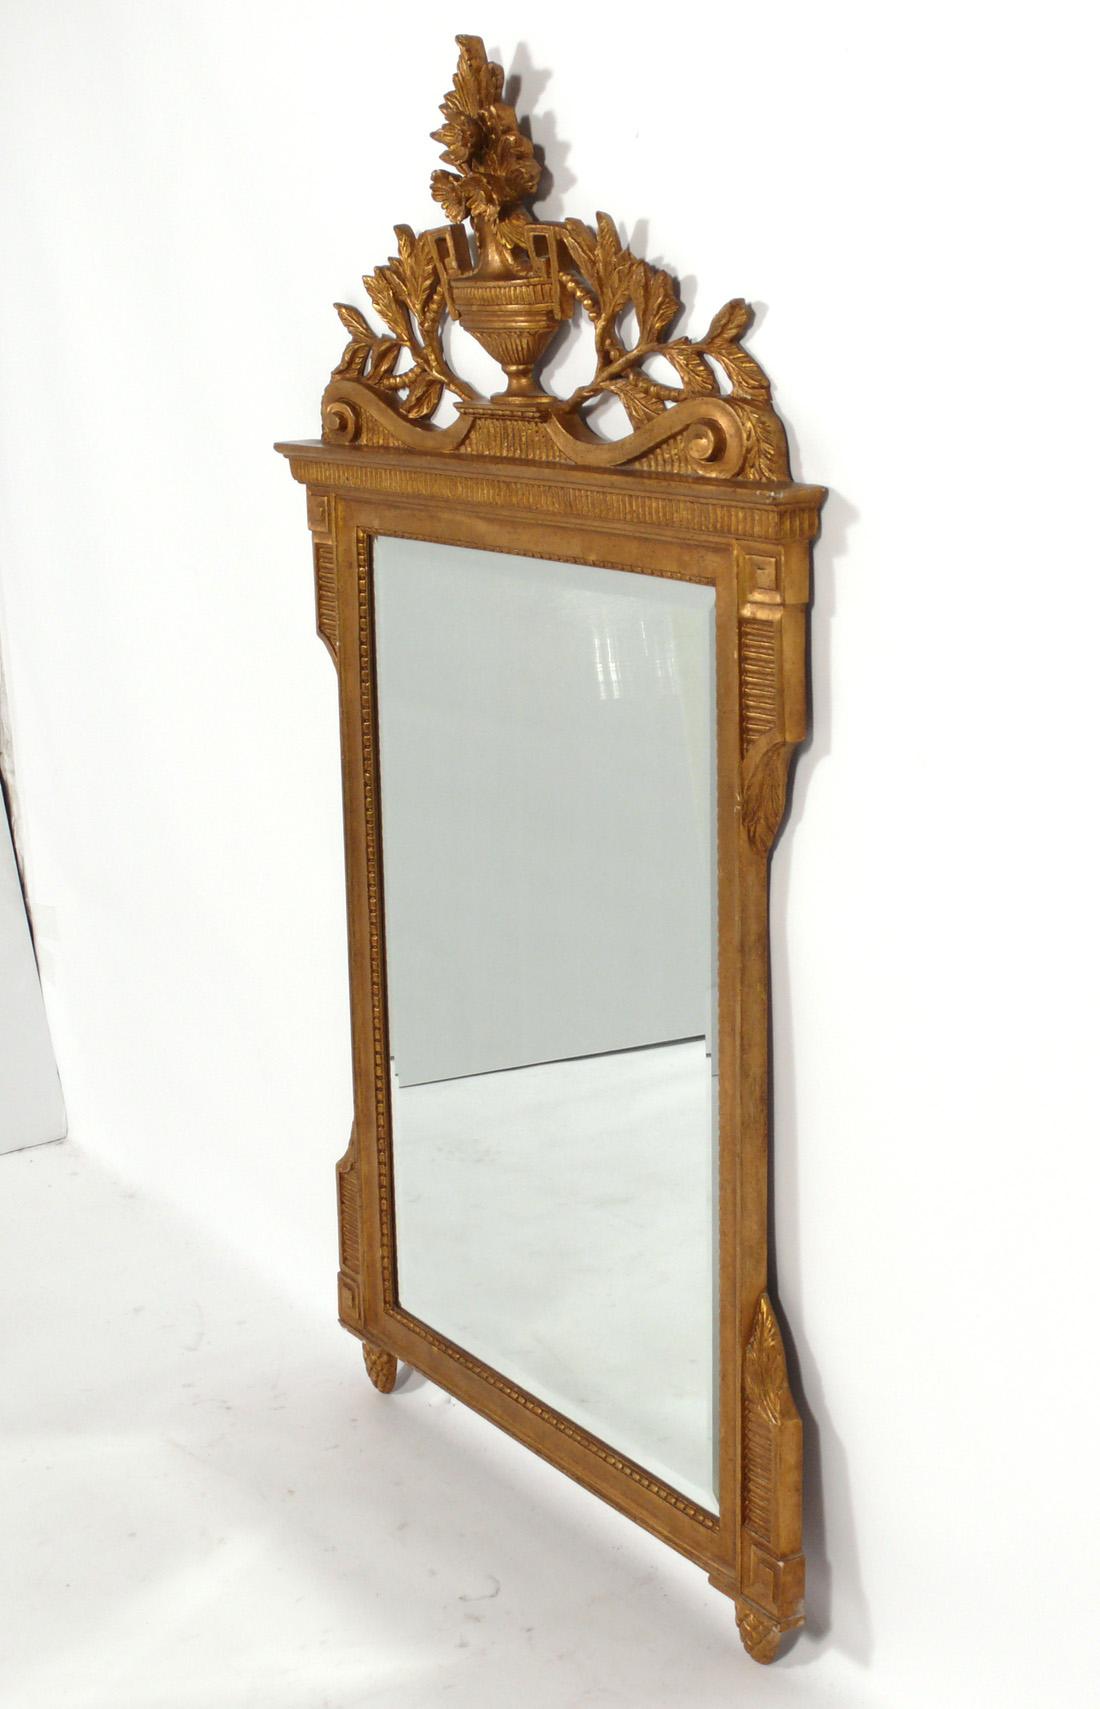 Italian Gilt Wood Beveled Mirror, Italy, circa 1950s. This mirror was recently removed from the legendary Carlyle Hotel in NYC. It measures an impressive 56.5